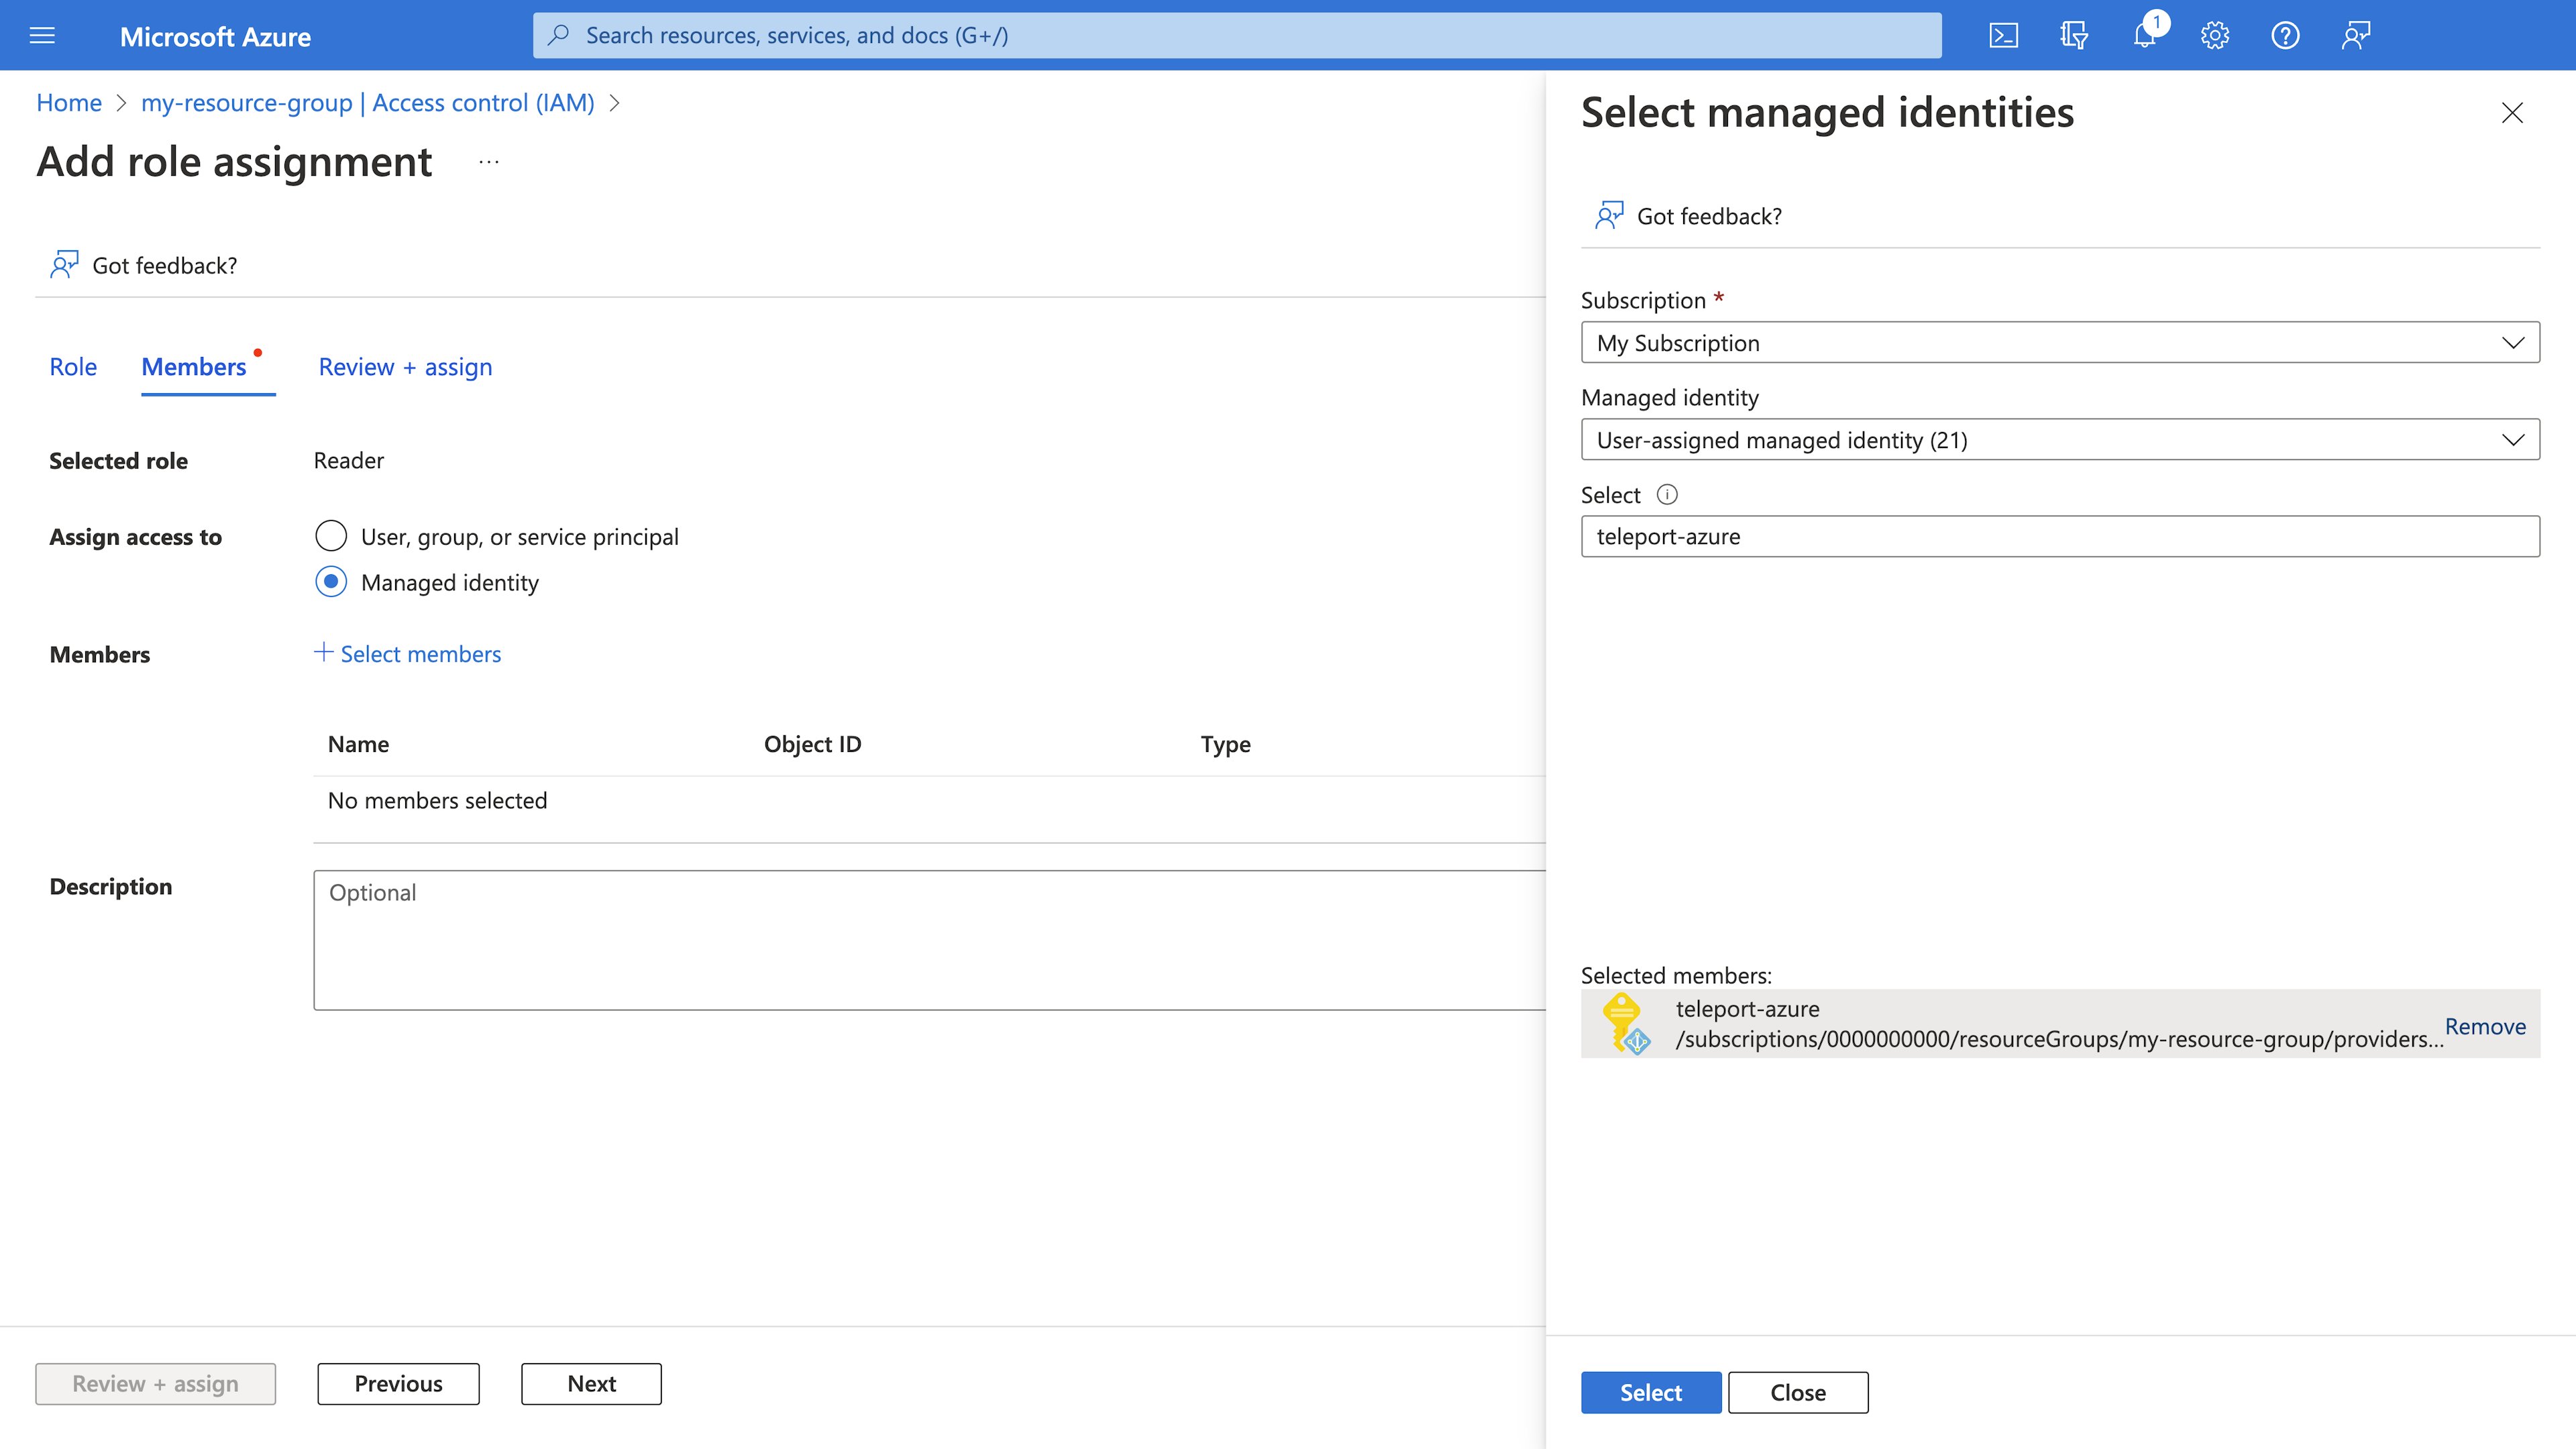 Select managed
identities